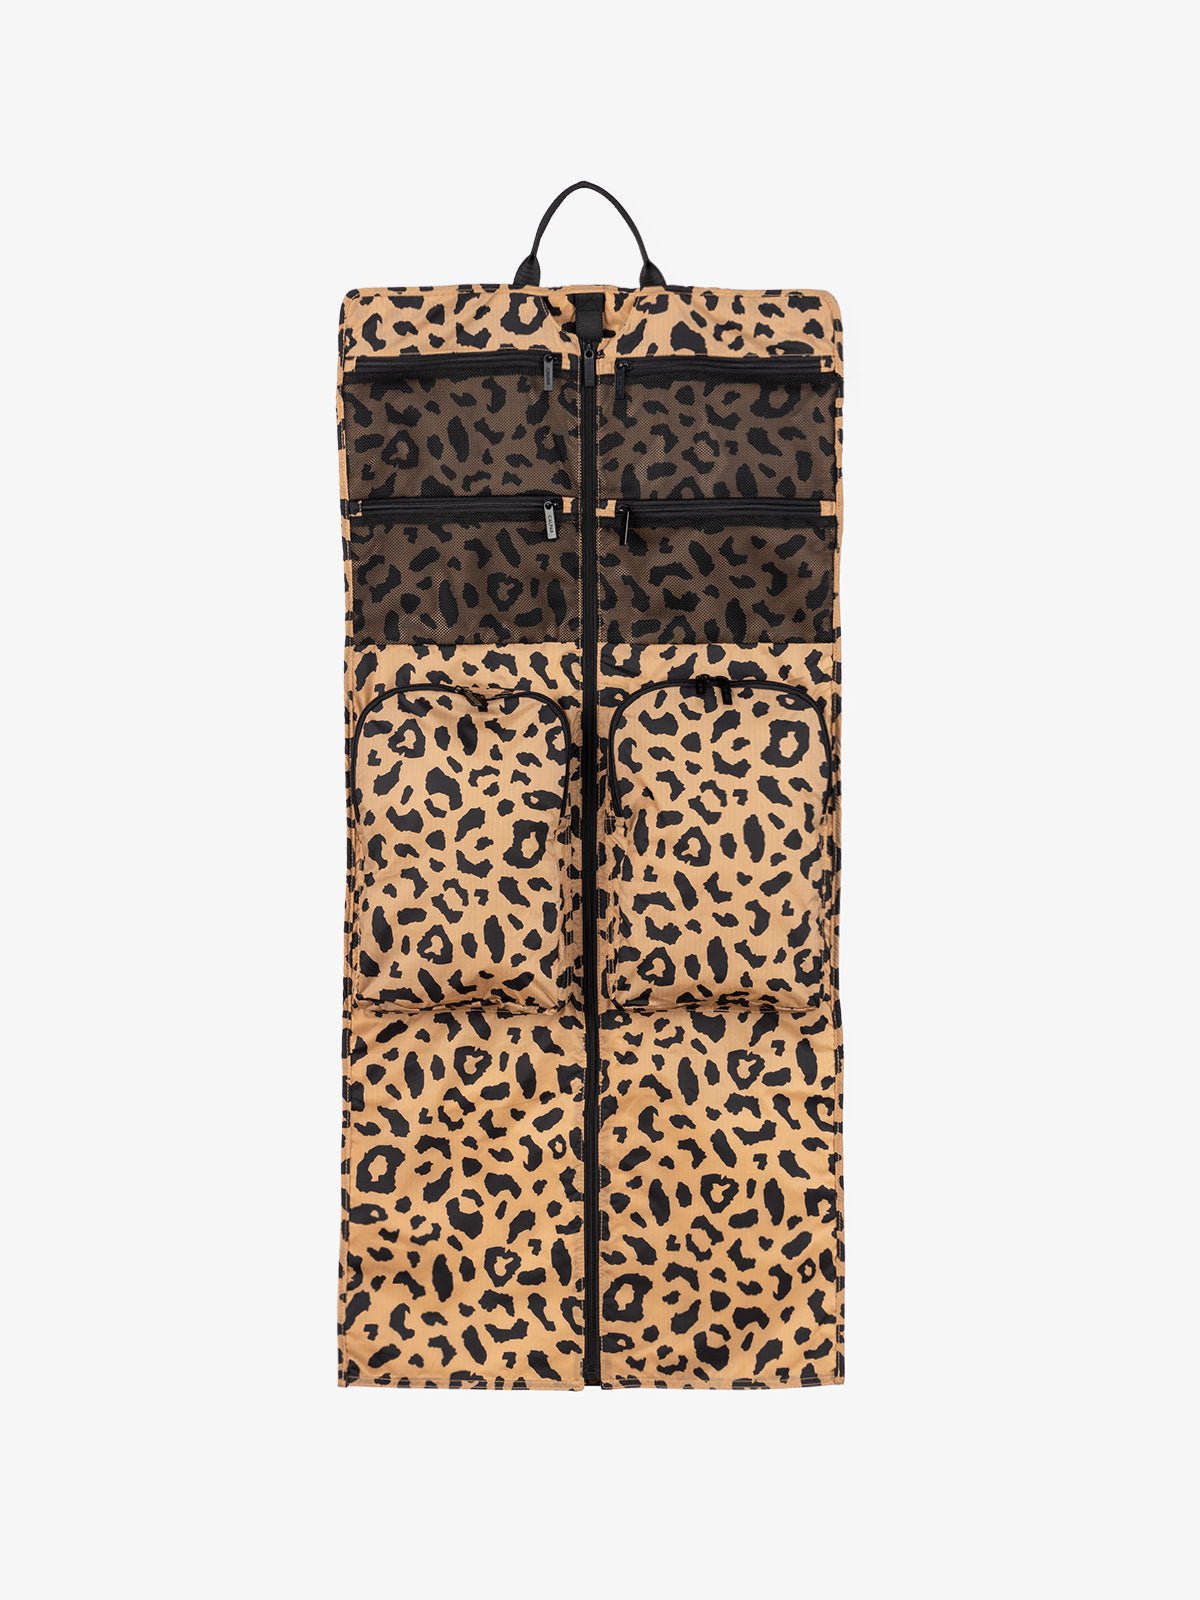 small garment bag with compartments in cheetah